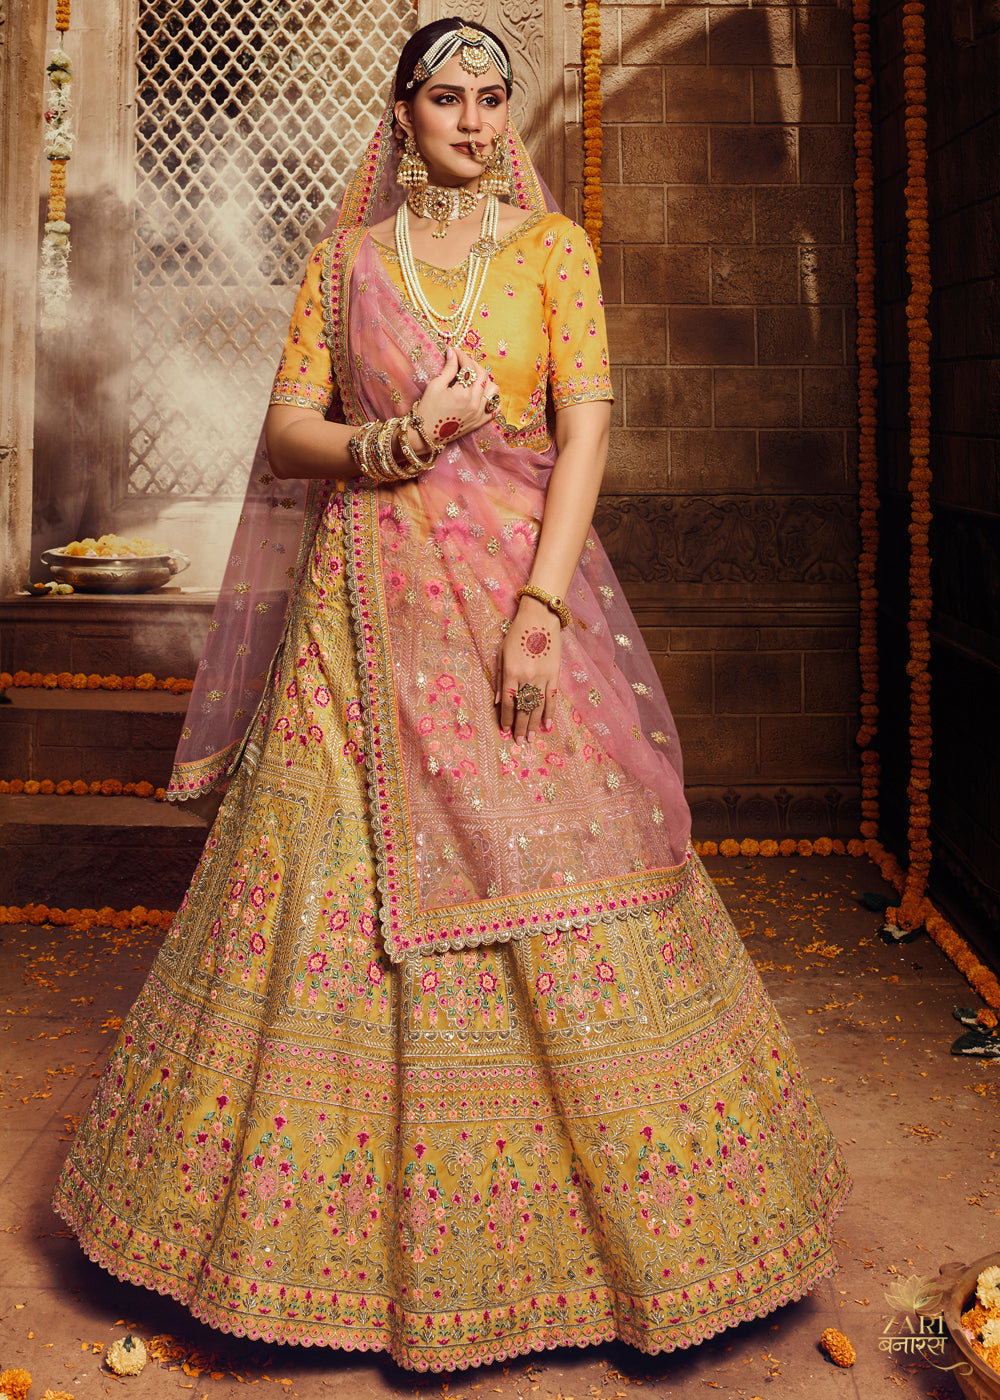 Hot Pink Lehenga paired with Gold Jewellery | Wedding looks, Bridal style,  Bride look